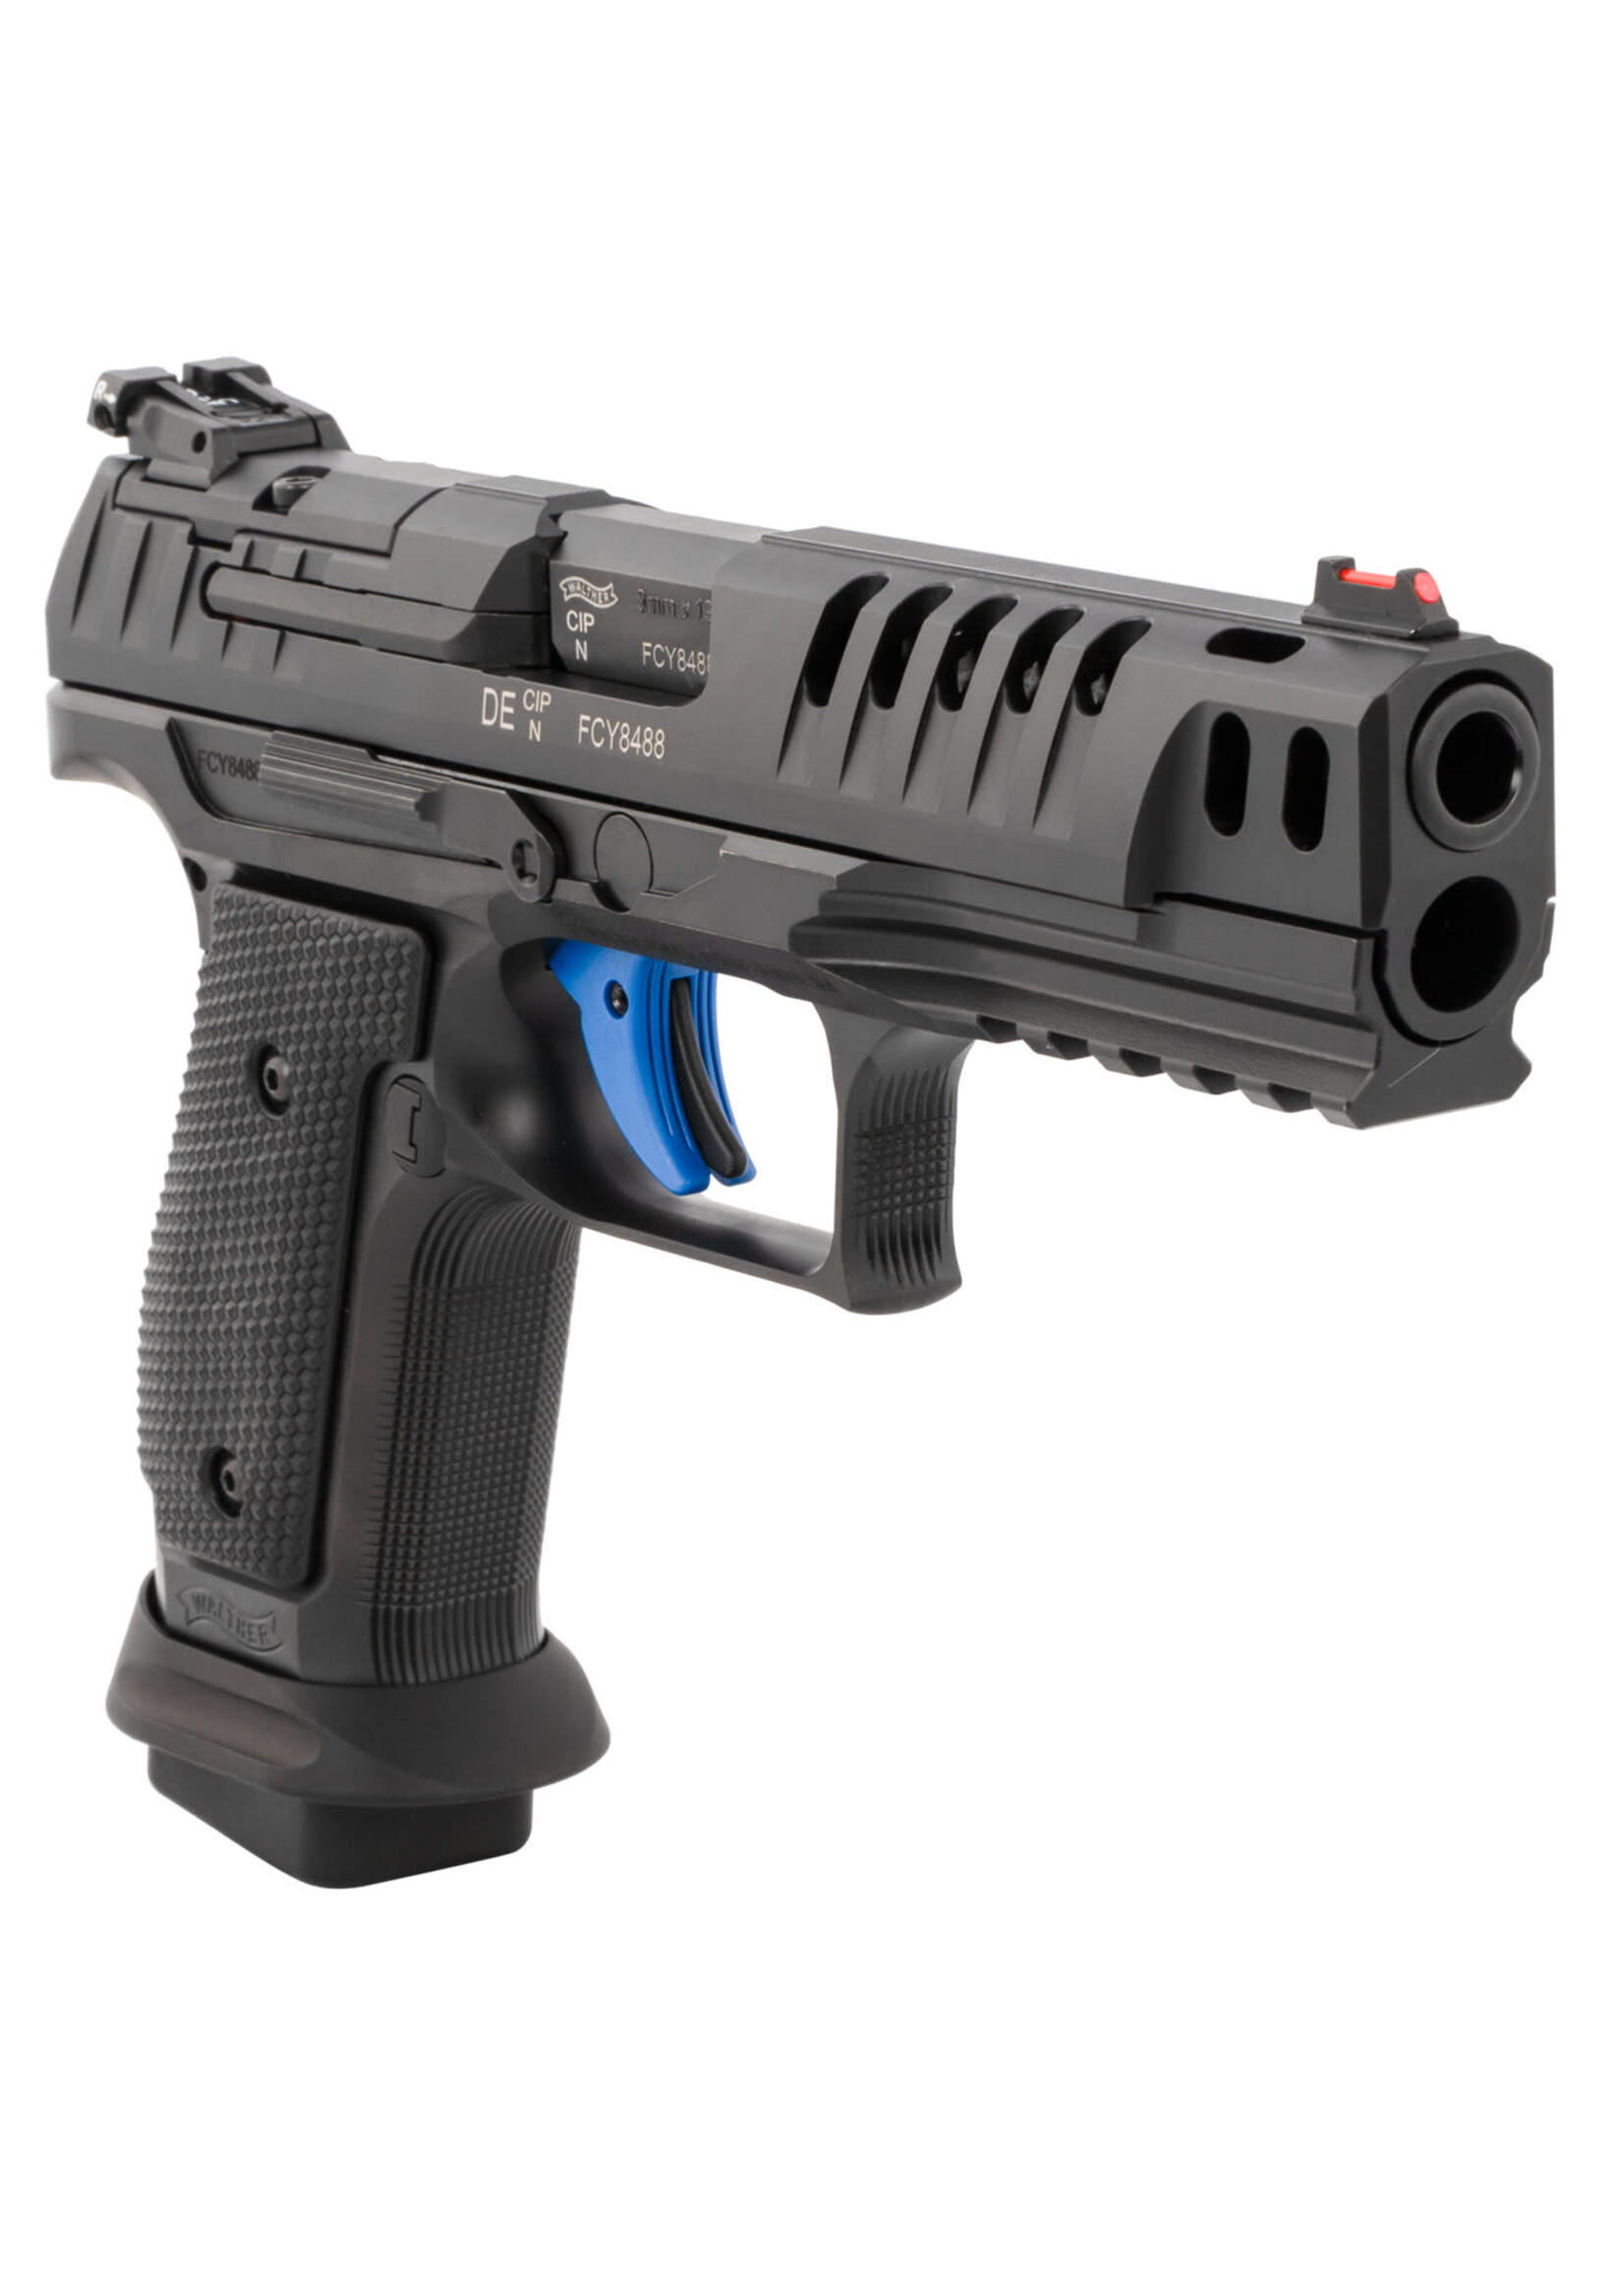 Walther Walther Arms 2846951 PPQ M2 Q5 Match Pro 9mm Luger Caliber with 5" Barrel, 17+1 Capacity, Black Finish Steel Picatinny Rail/Beavertail Frame, Serrated/Optic Cut Matte Black Tenifer Steel Ported Slide & Wraparound Ergonomic Grip